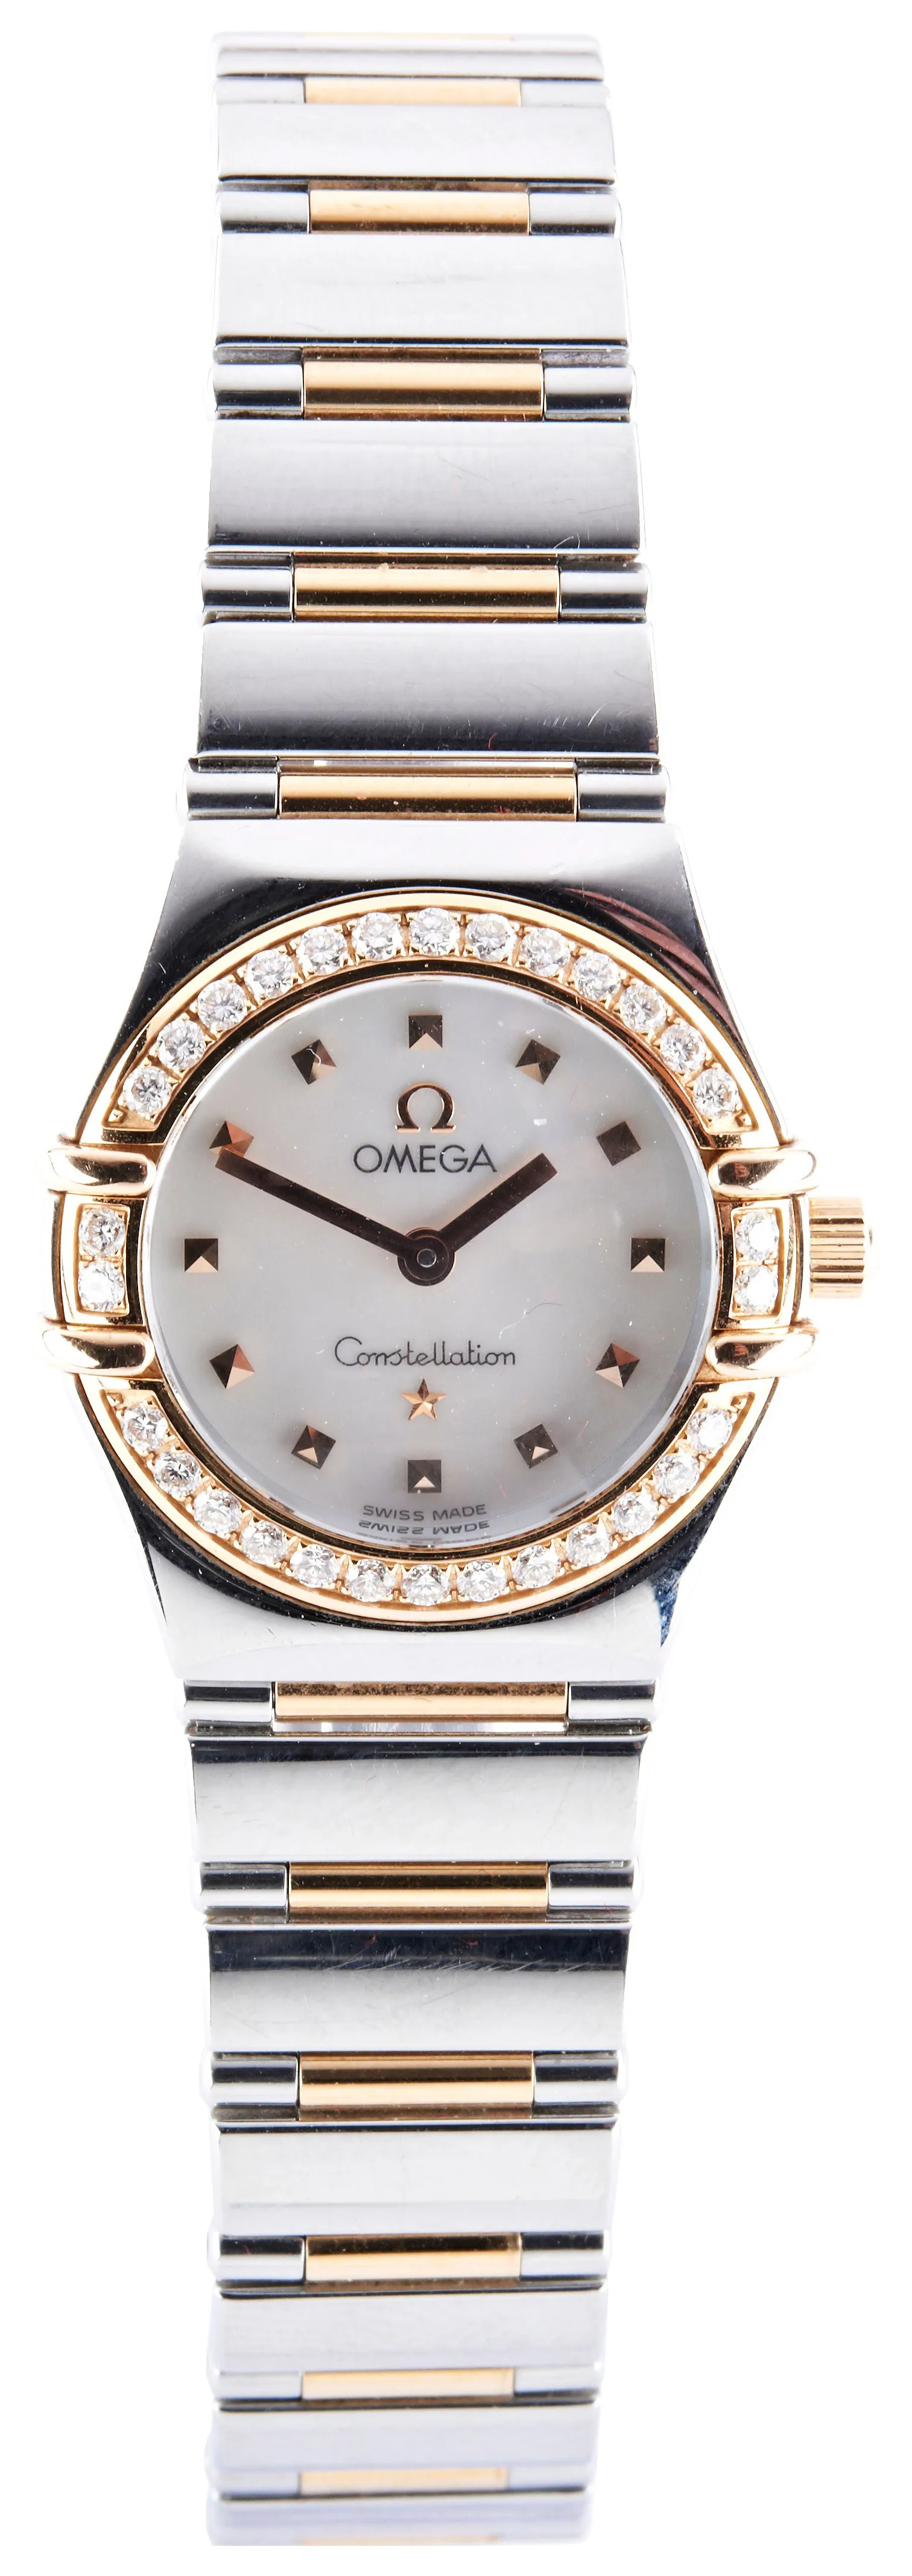 Omega Constellation 1368.71.00 22.5mm Yellow gold, stainless steel and diamond-set Mother of pearl & Diamond